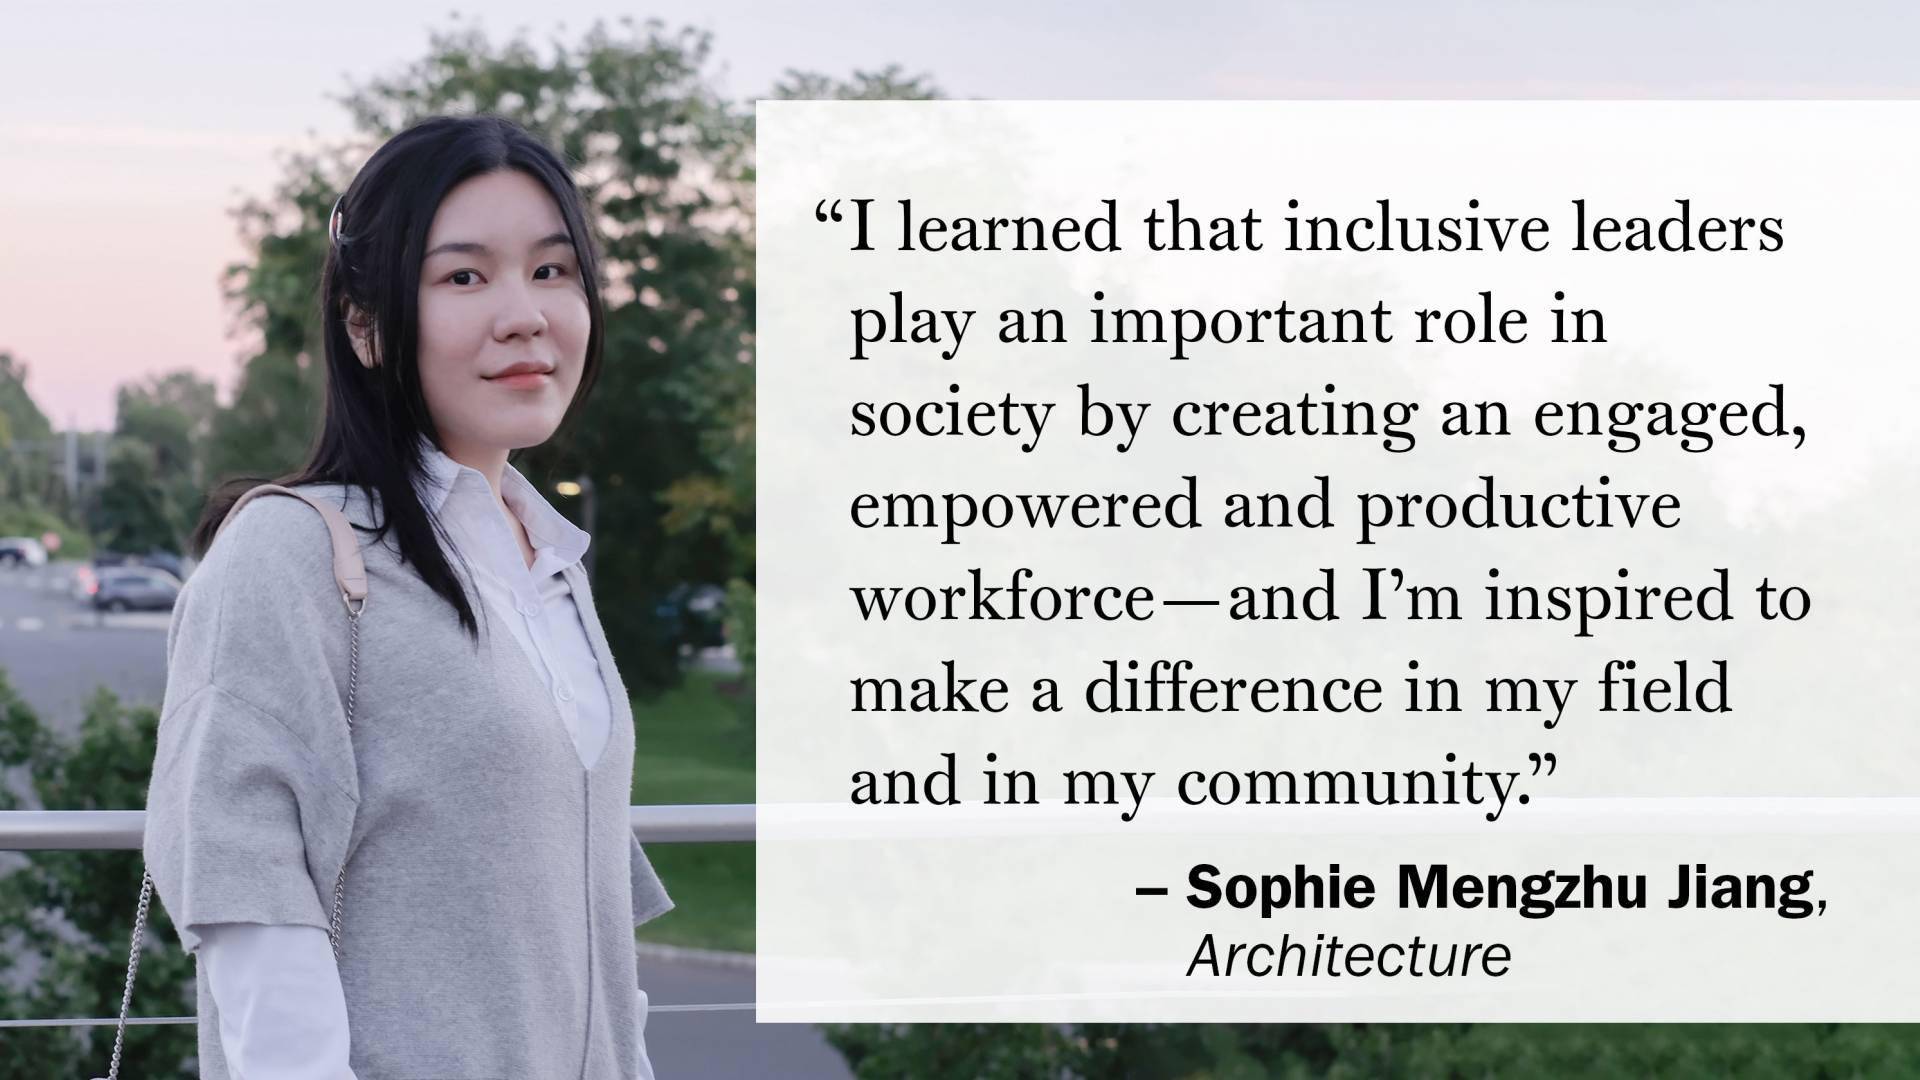 "I learned that inclusive leaders play an important role in society by creating an engaged, empowered and productive workforce—and I’m inspired to make a difference in my field and in my community." — Sophie Mengzhu Jiang, Architecture